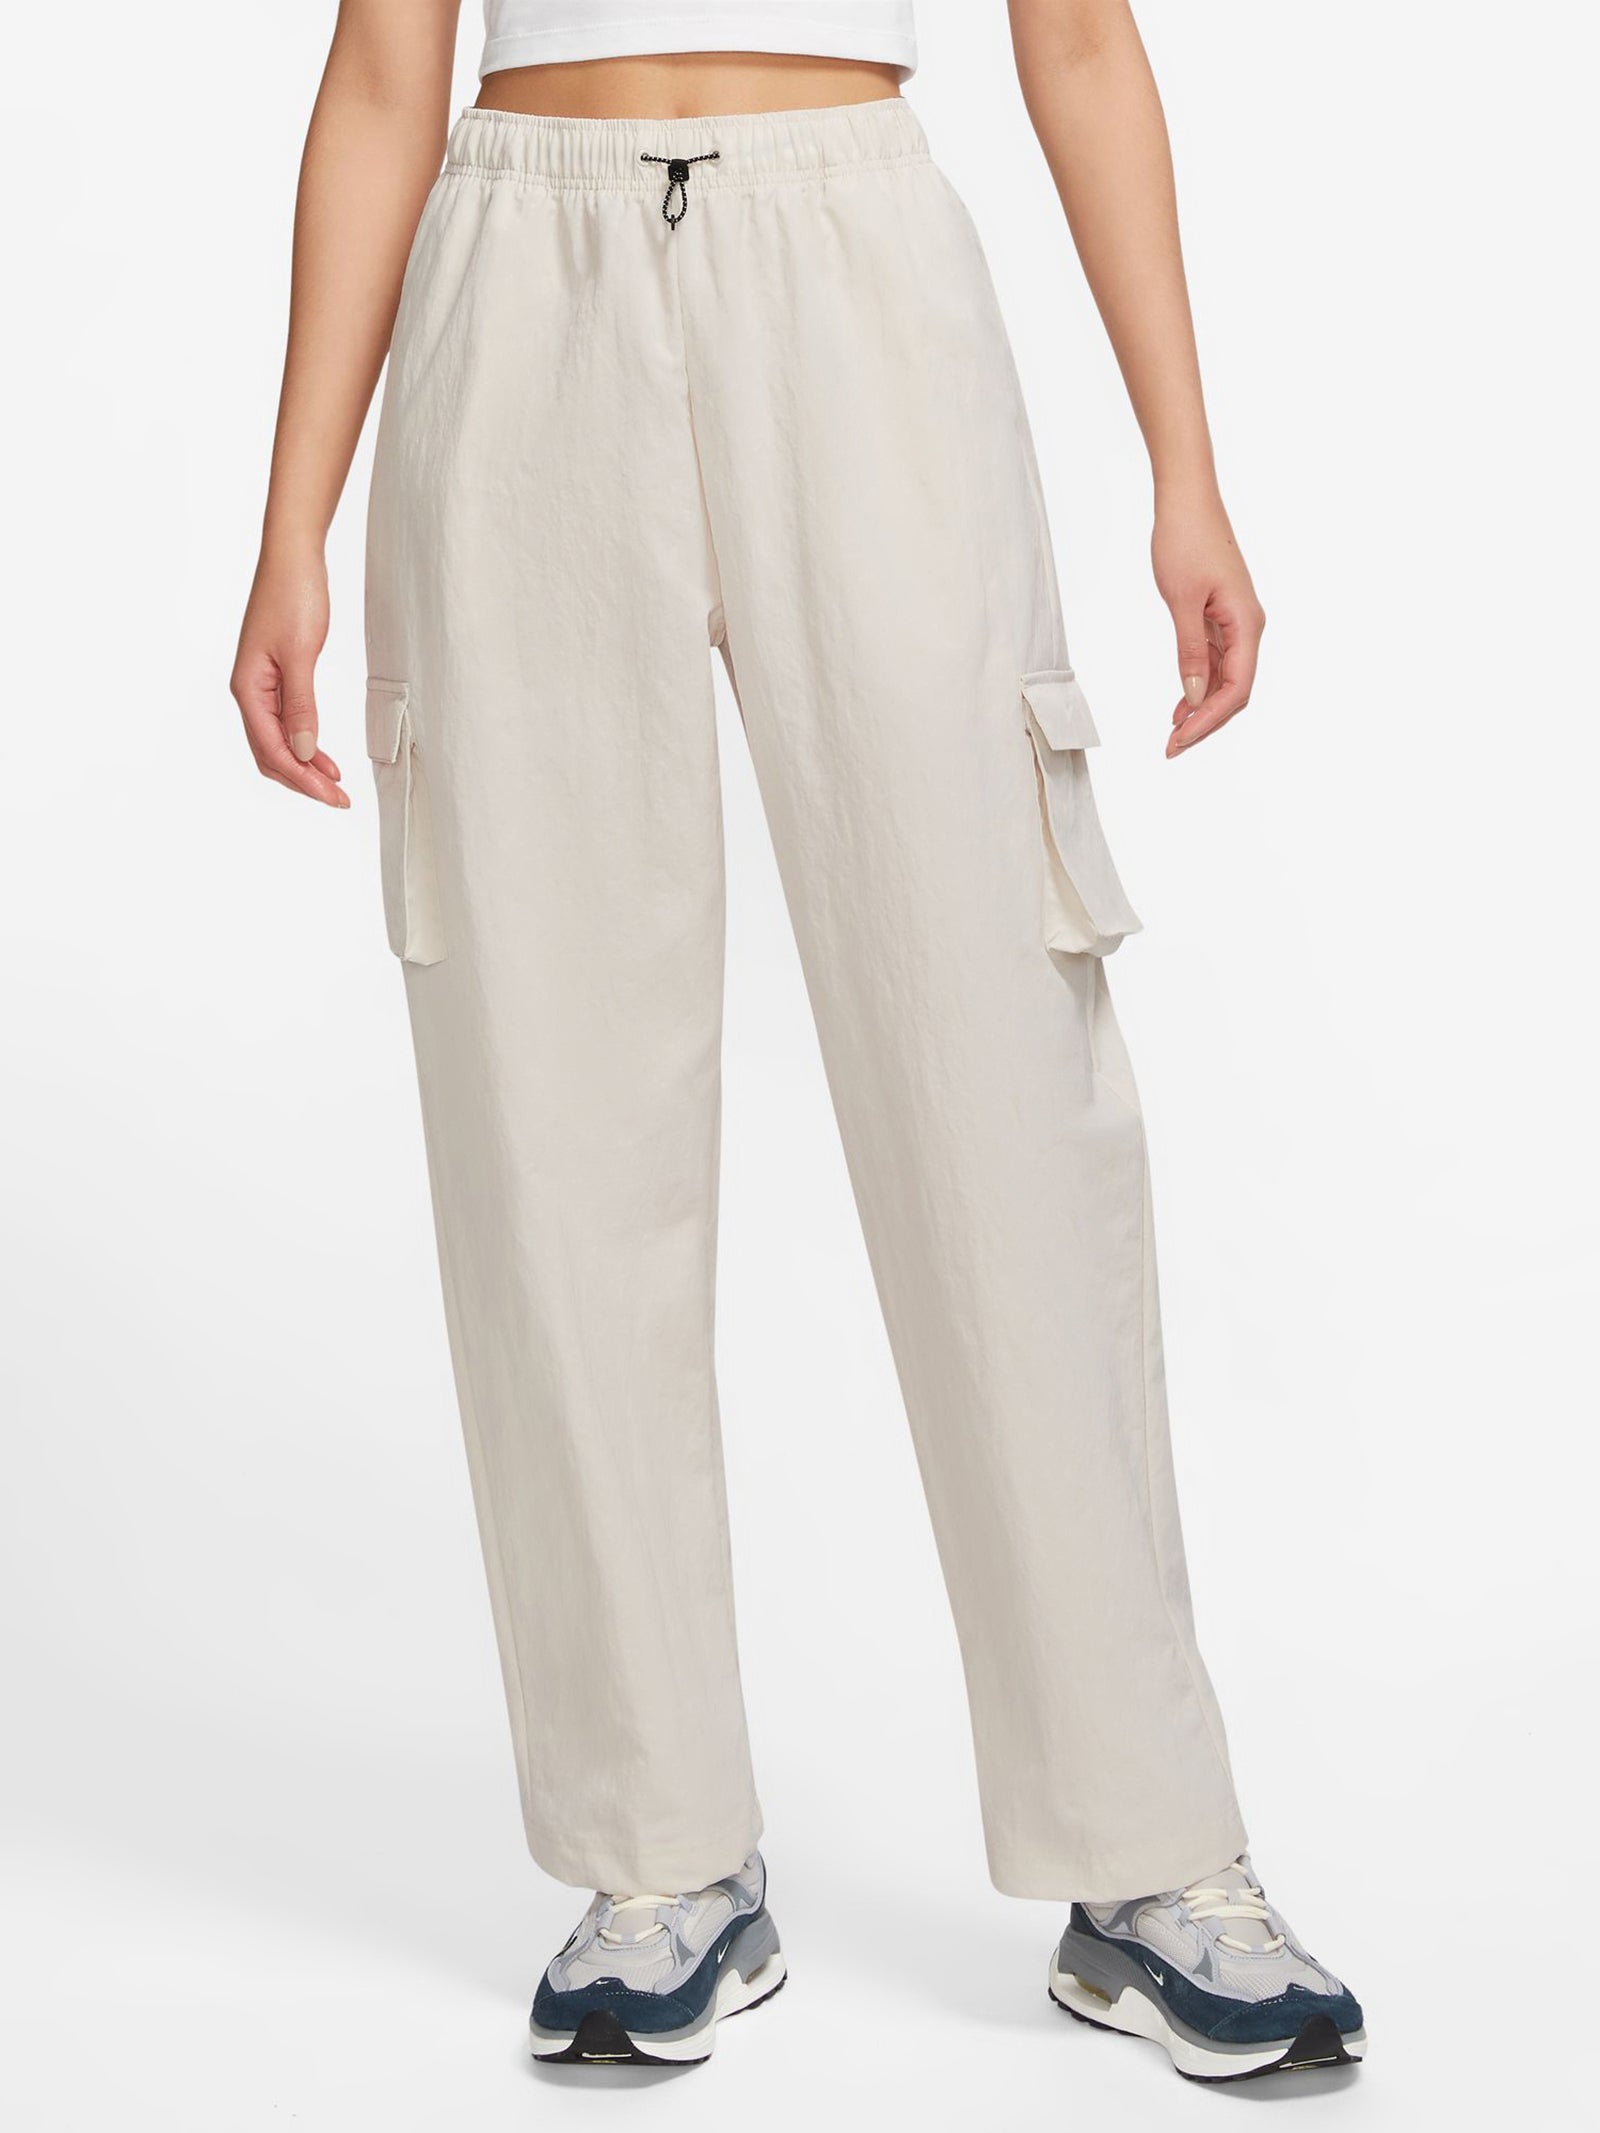 A New Day Women's High-Rise Tapered Ankle Chino Pants XL White